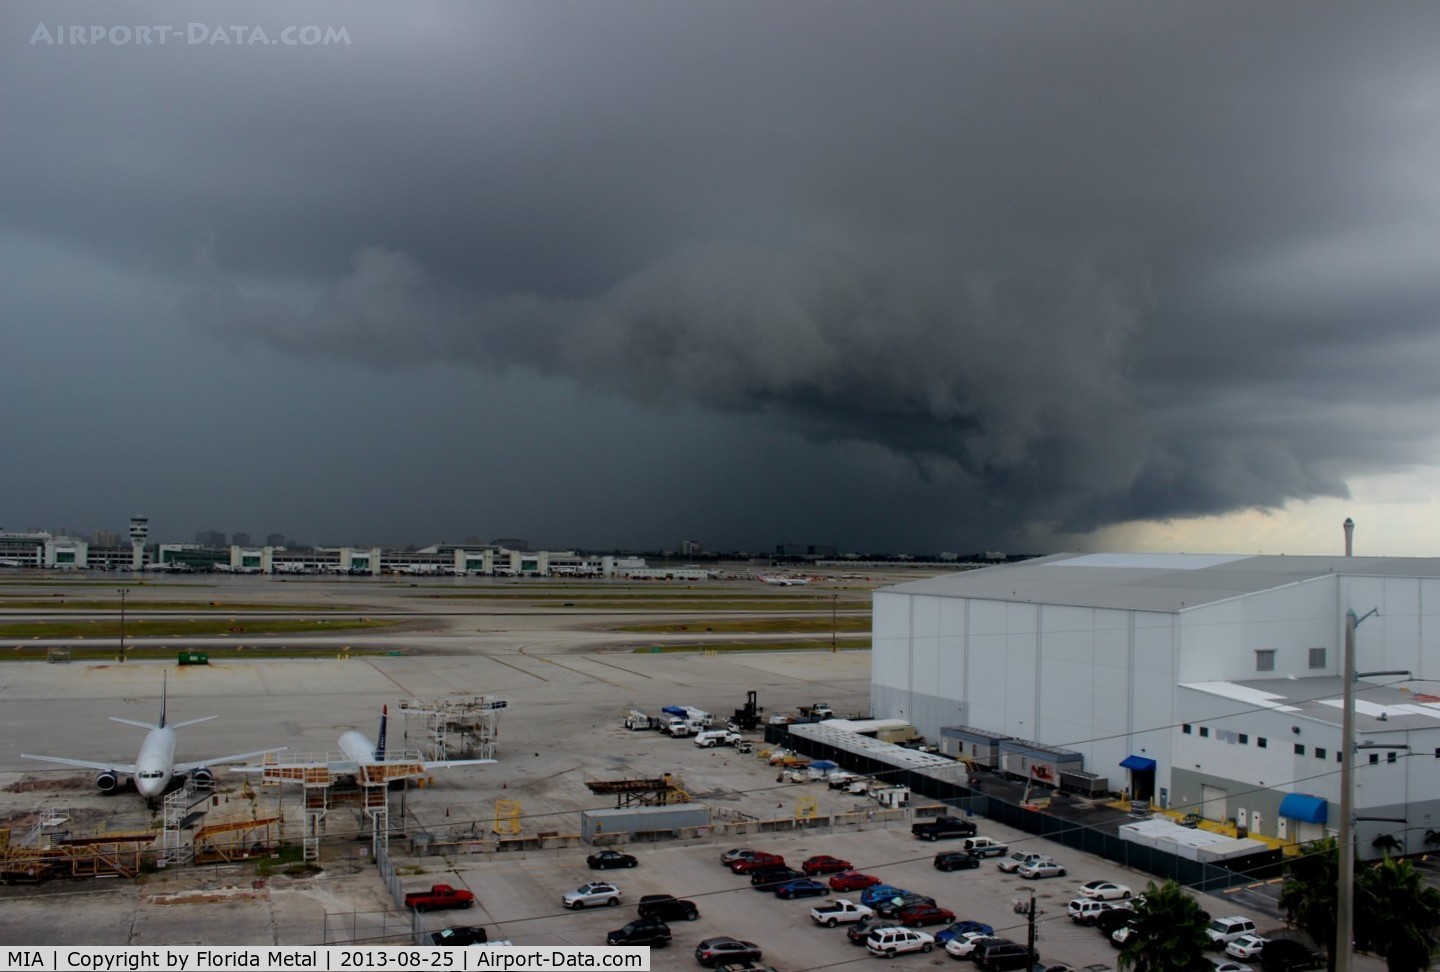 Miami International Airport (MIA) - Looking southwest over MIA, strong storm rolls in off of the ocean over Coral Gables, Westchester and Fountainebleau before hitting MIA